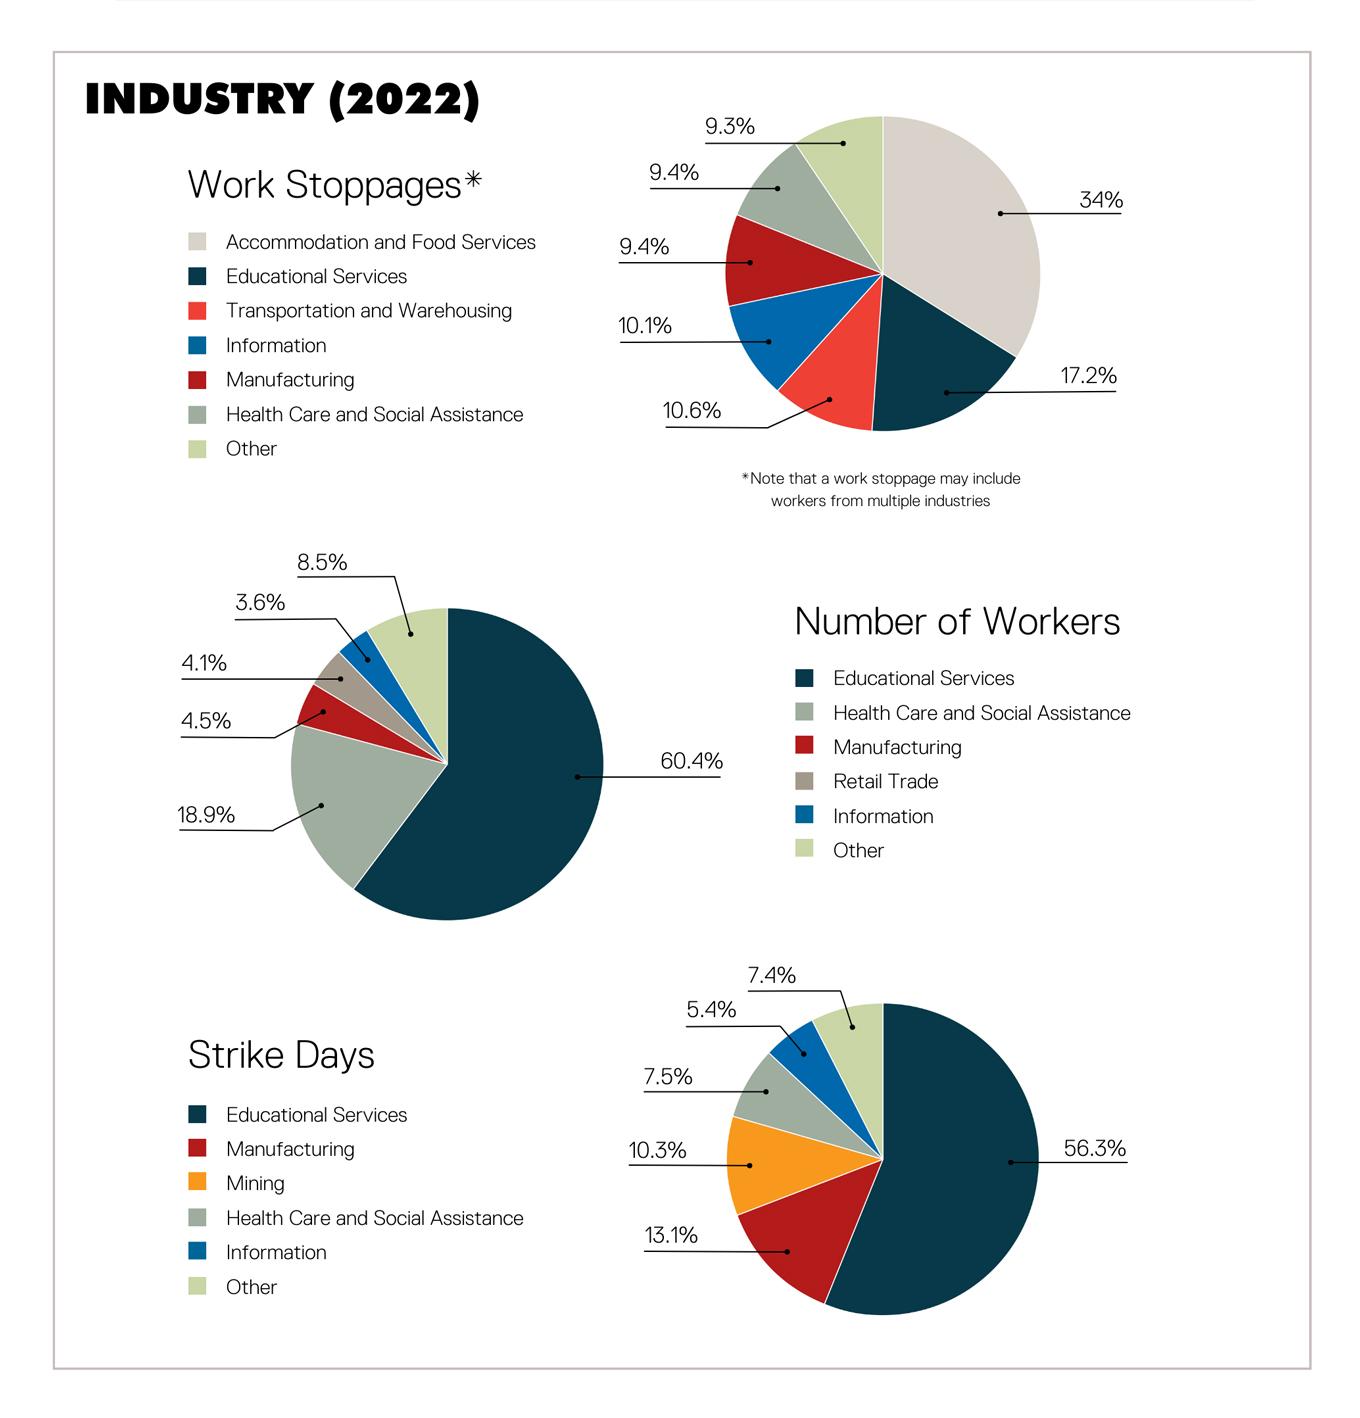 Pie charts showing the breakdown of U.S. strikes and work stoppages by industry